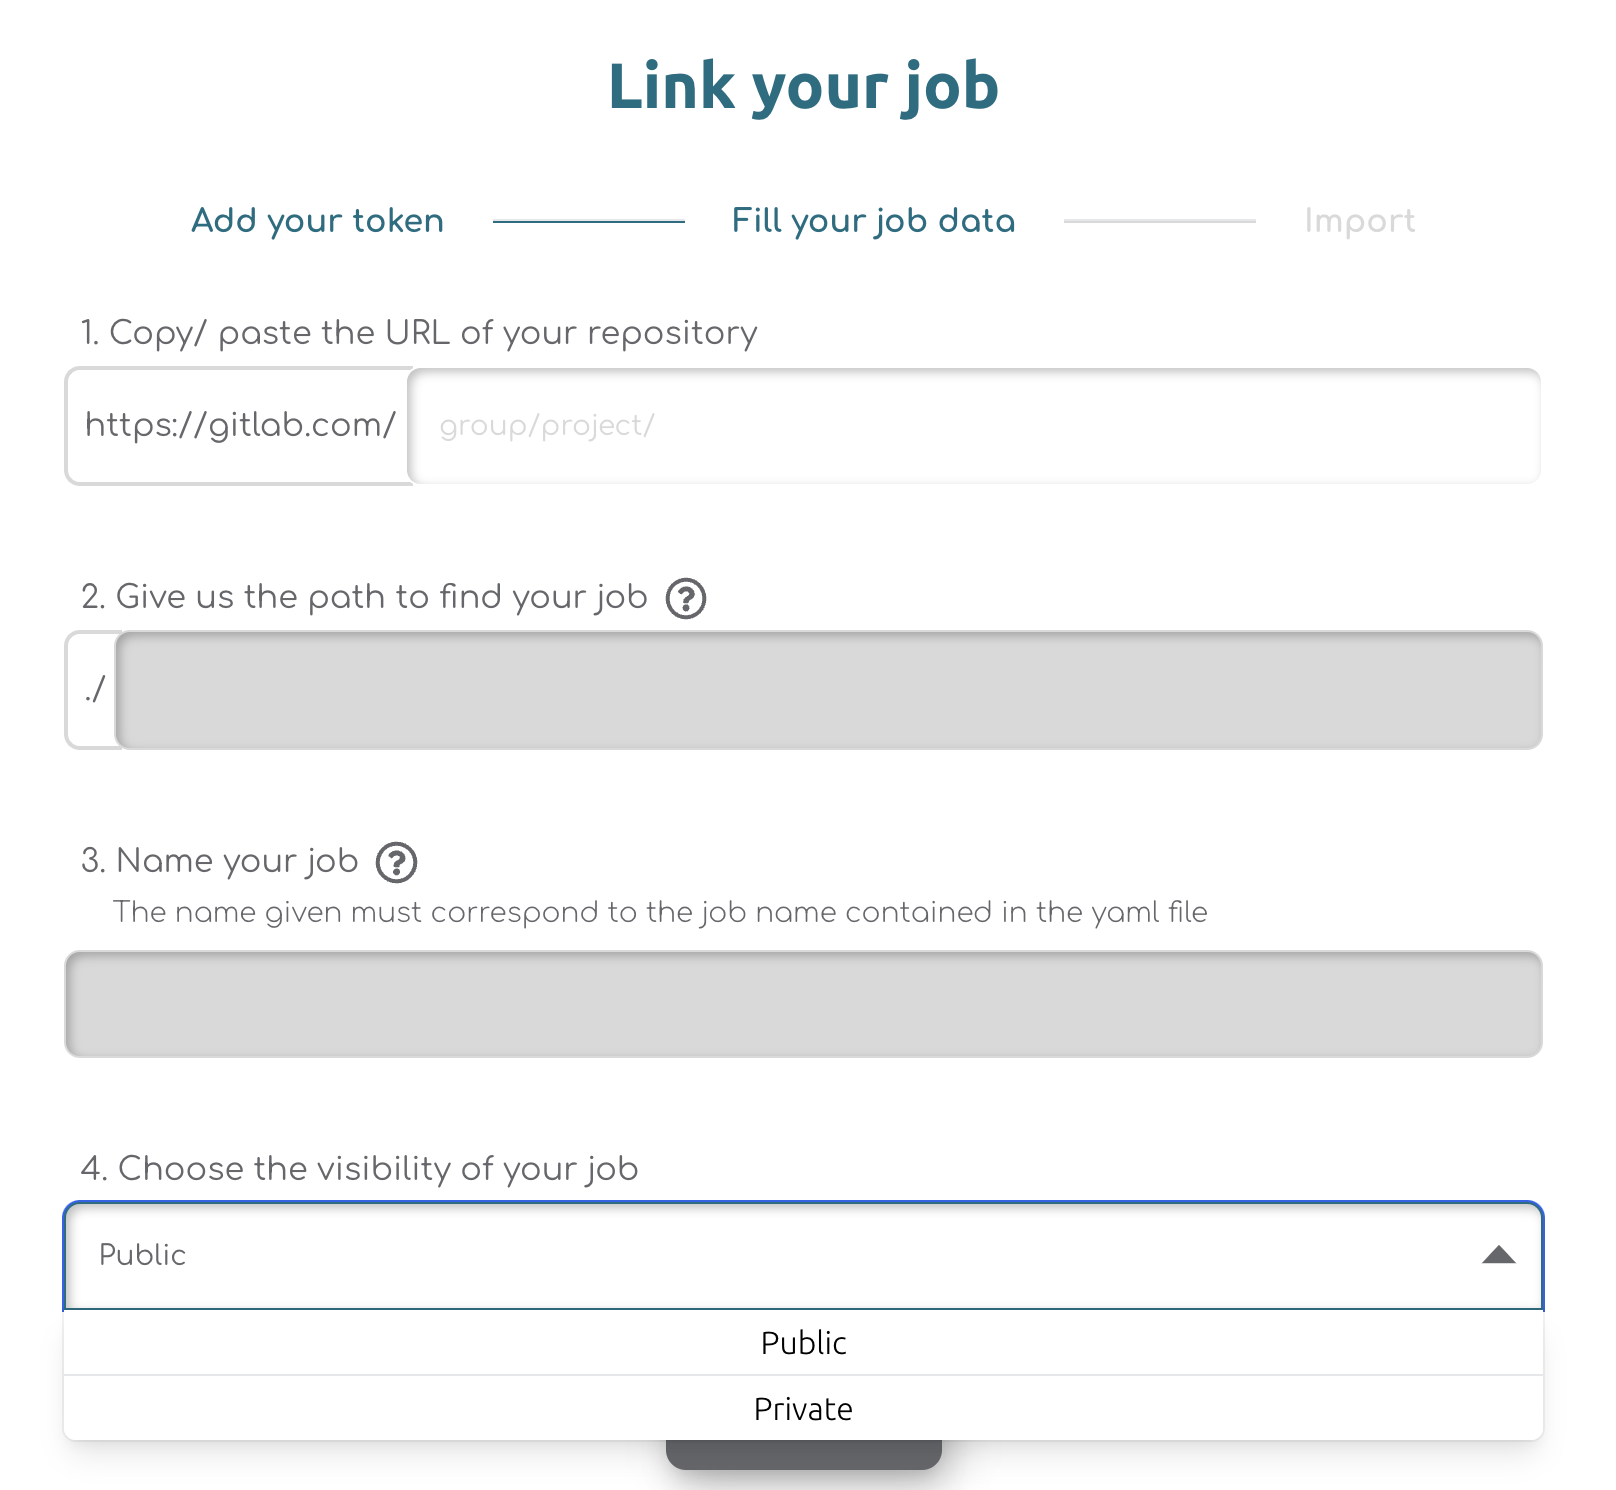 Choose the visibility of your job in the job's information panel